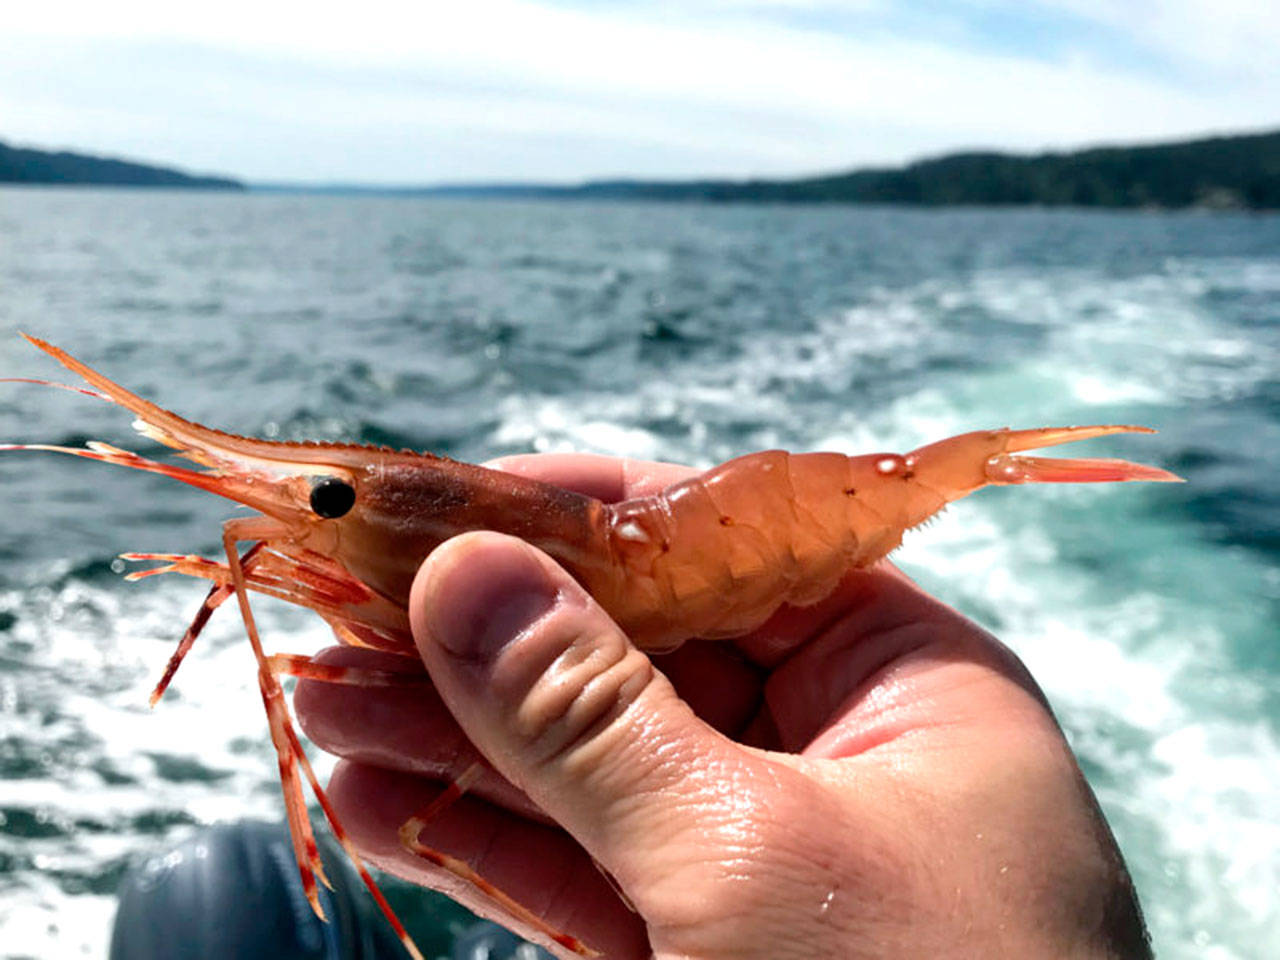 Shrimping in the prime Hood Canal and Discovery Bay shrimping districts got underway Thursday and will continue Monday and on other dates in June and July.